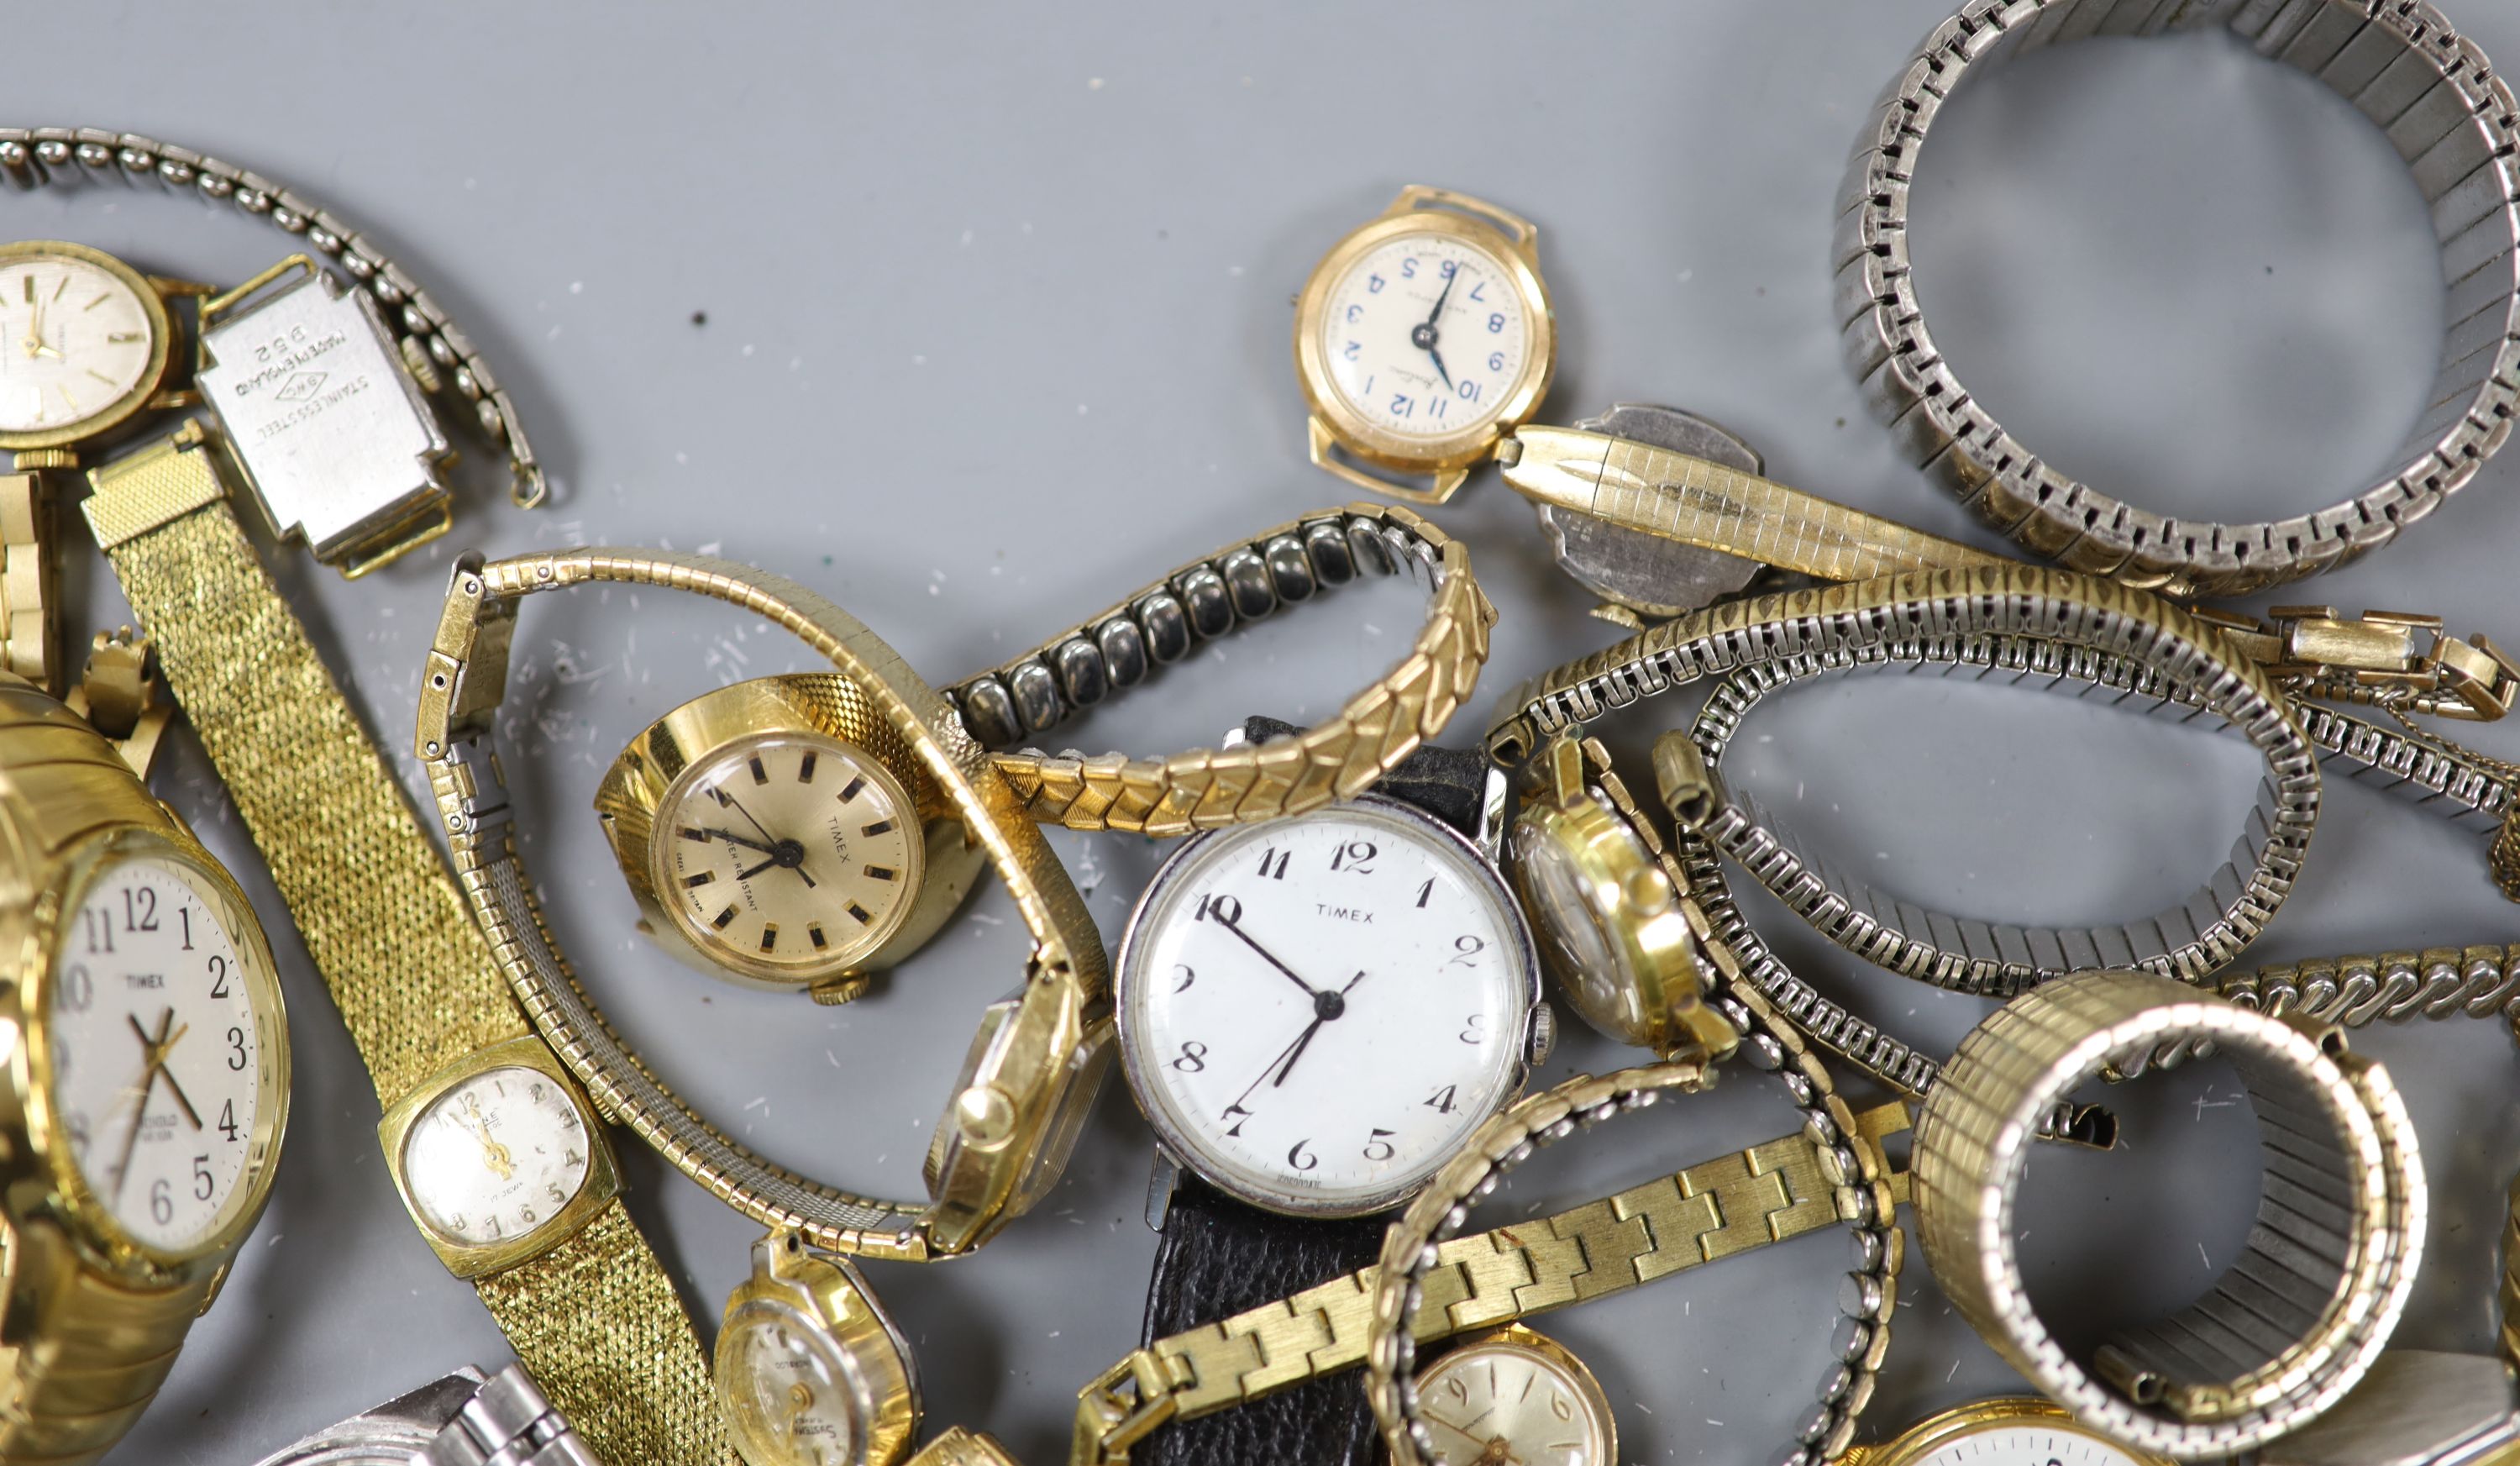 A collection of assorted lady's and gentleman's wristwatches including Timex, Accurist and Seiko.